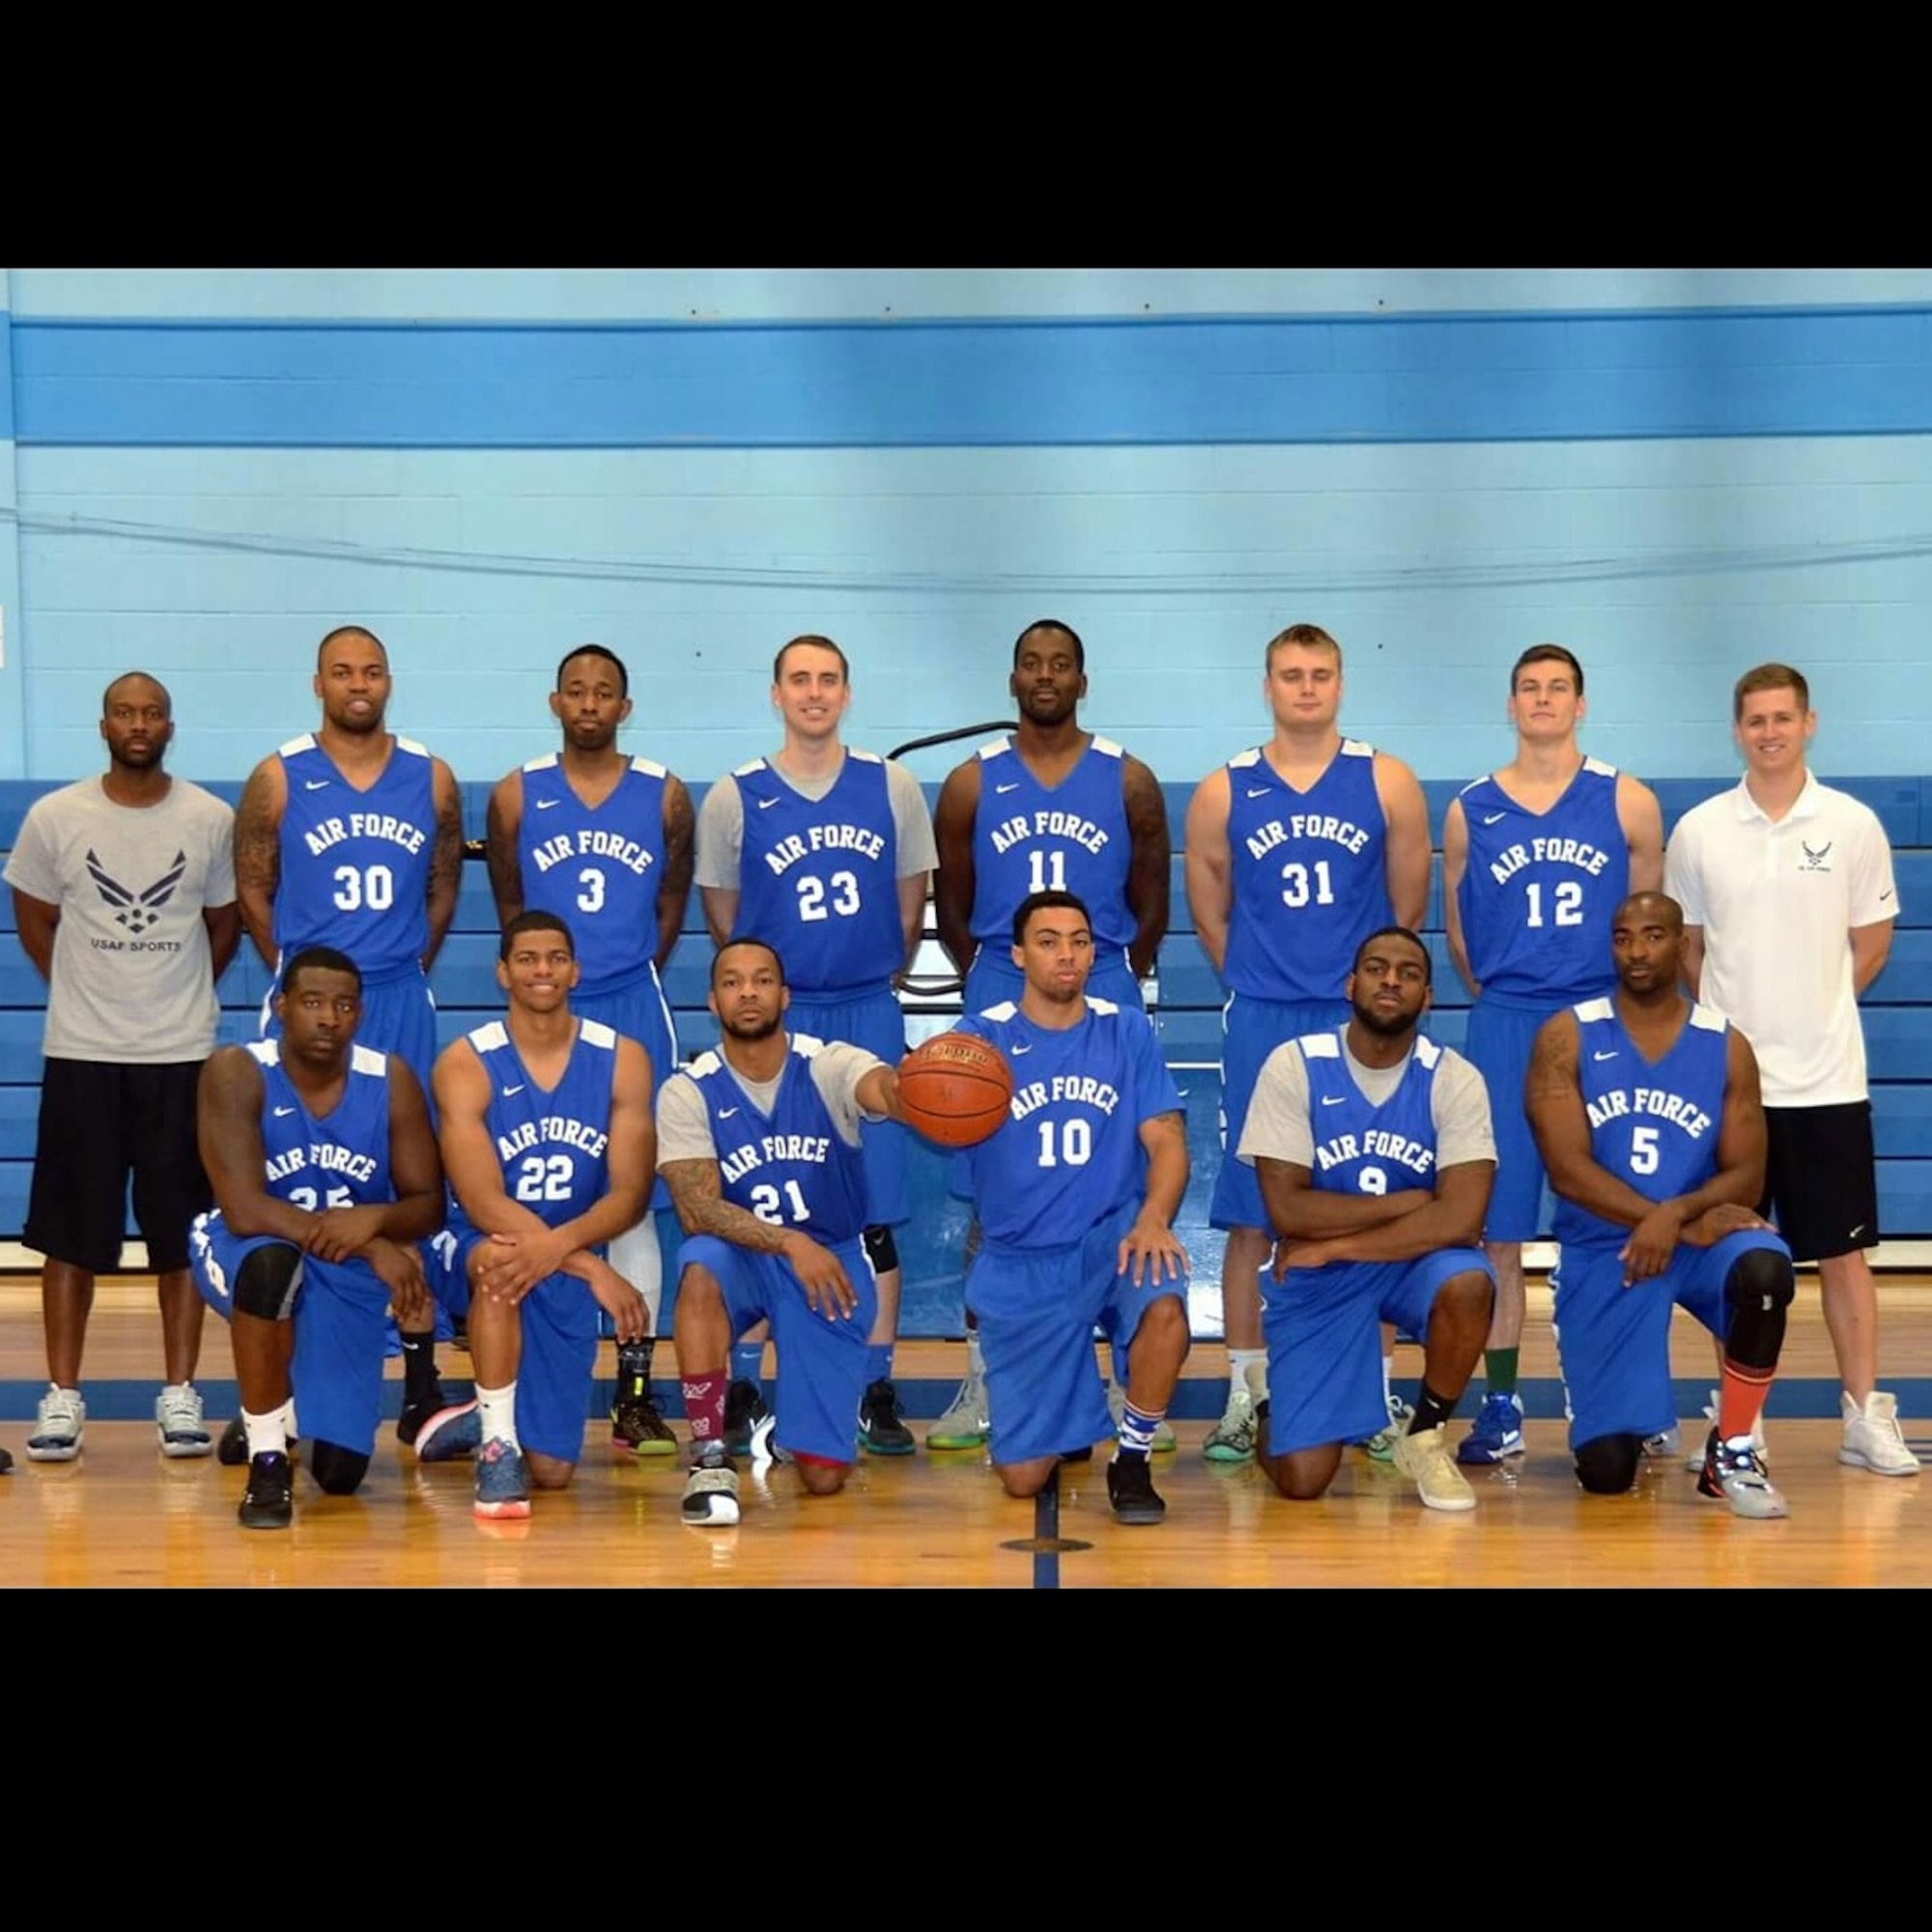 Staff Sgt. Brian Washington, an Airman dormitory leader with the 1st Special Operations Civil Engineer Squadron, fifth from the left on bottom row, poses for a group photo along with teammates. The All-Air Force Men’s Basketball team is competing in the Armed Forces Tournament through Nov. 8. (Courtesy Photo)